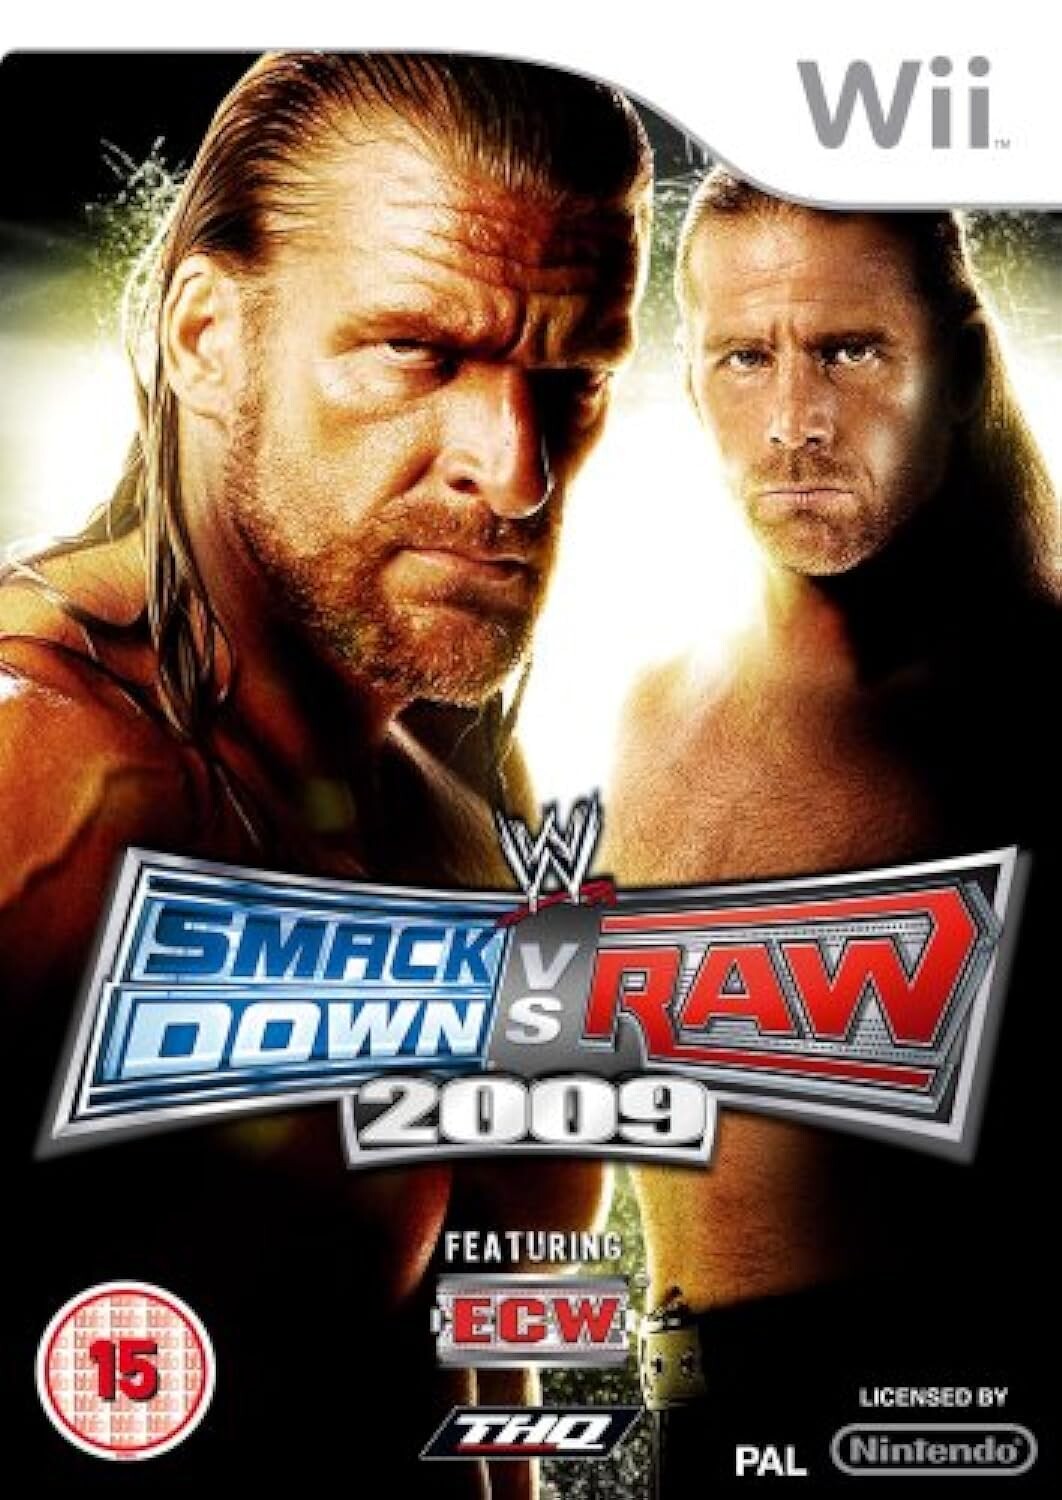 WWE SmackDown vs. Raw 2009 (French) Kopen | Wii Games